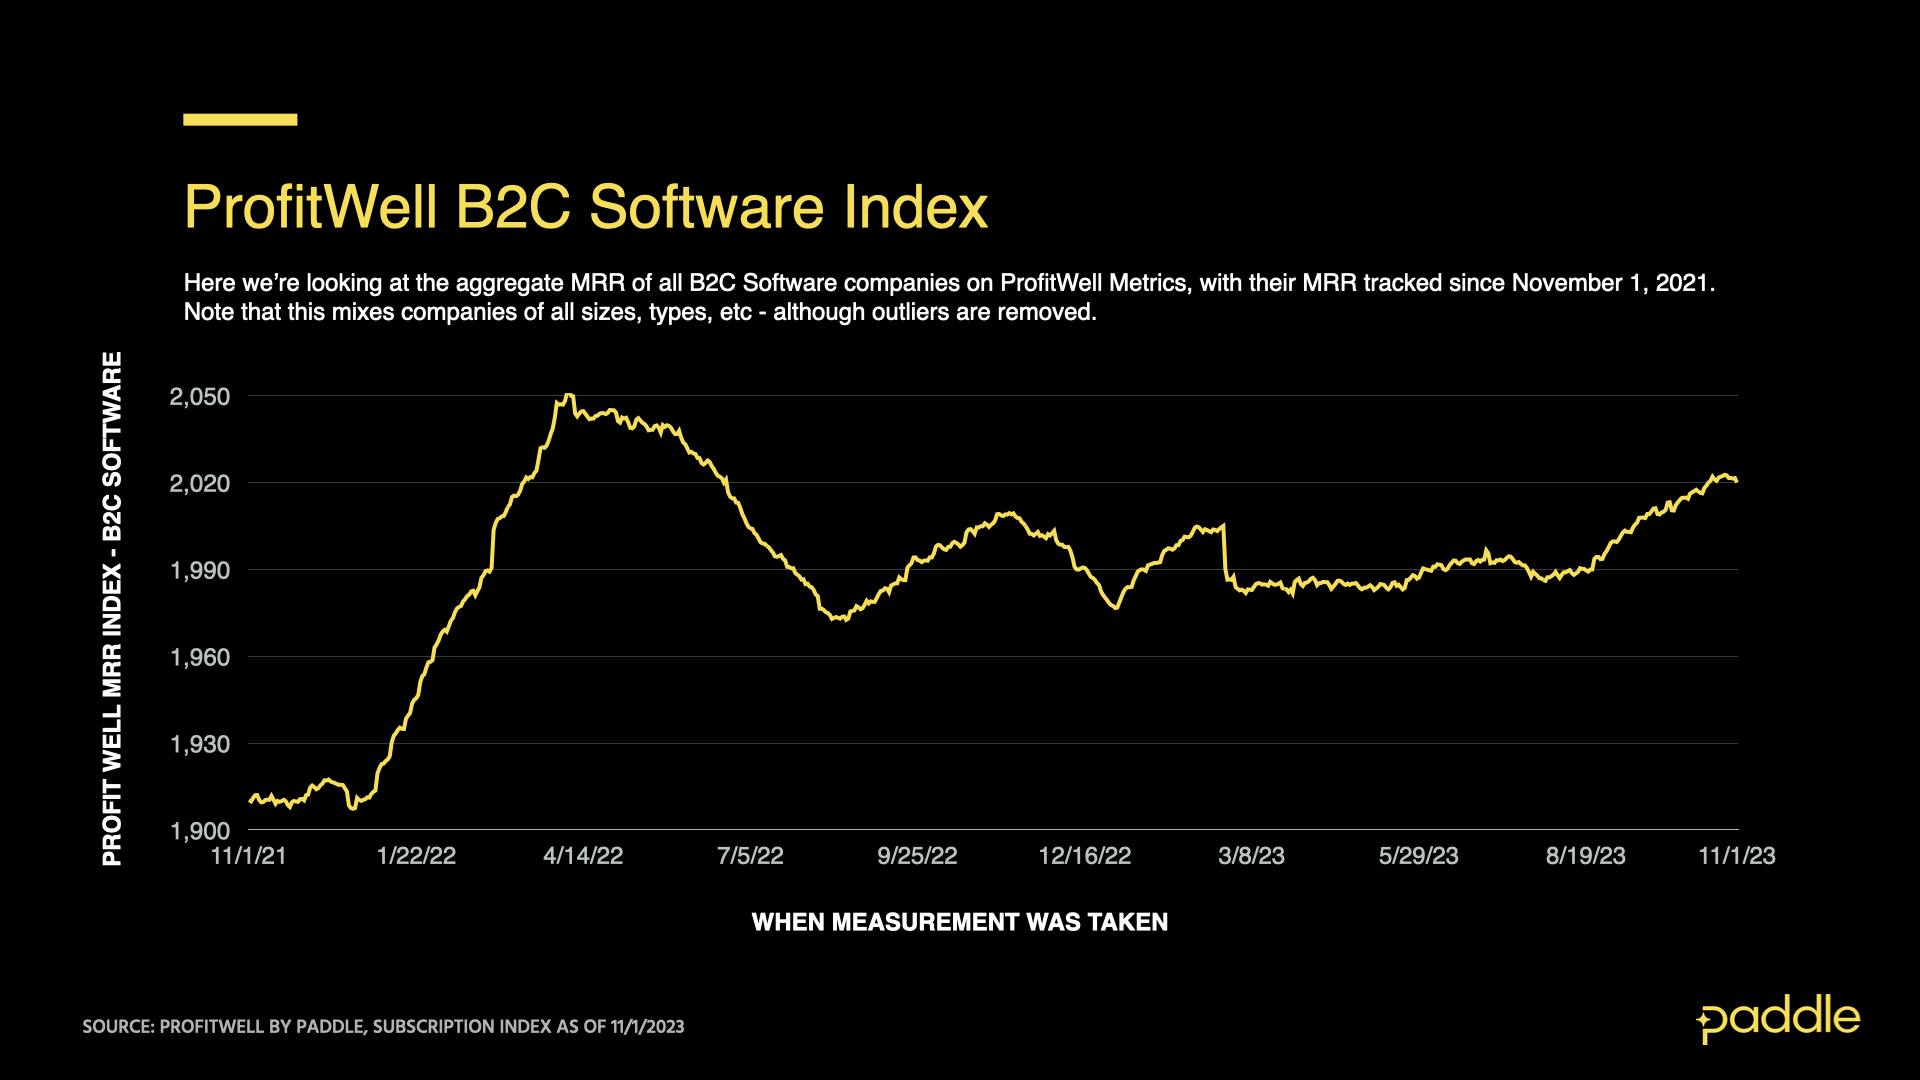 ProfitWell B2C Software Index as of November 1, 2023 - MRR over time